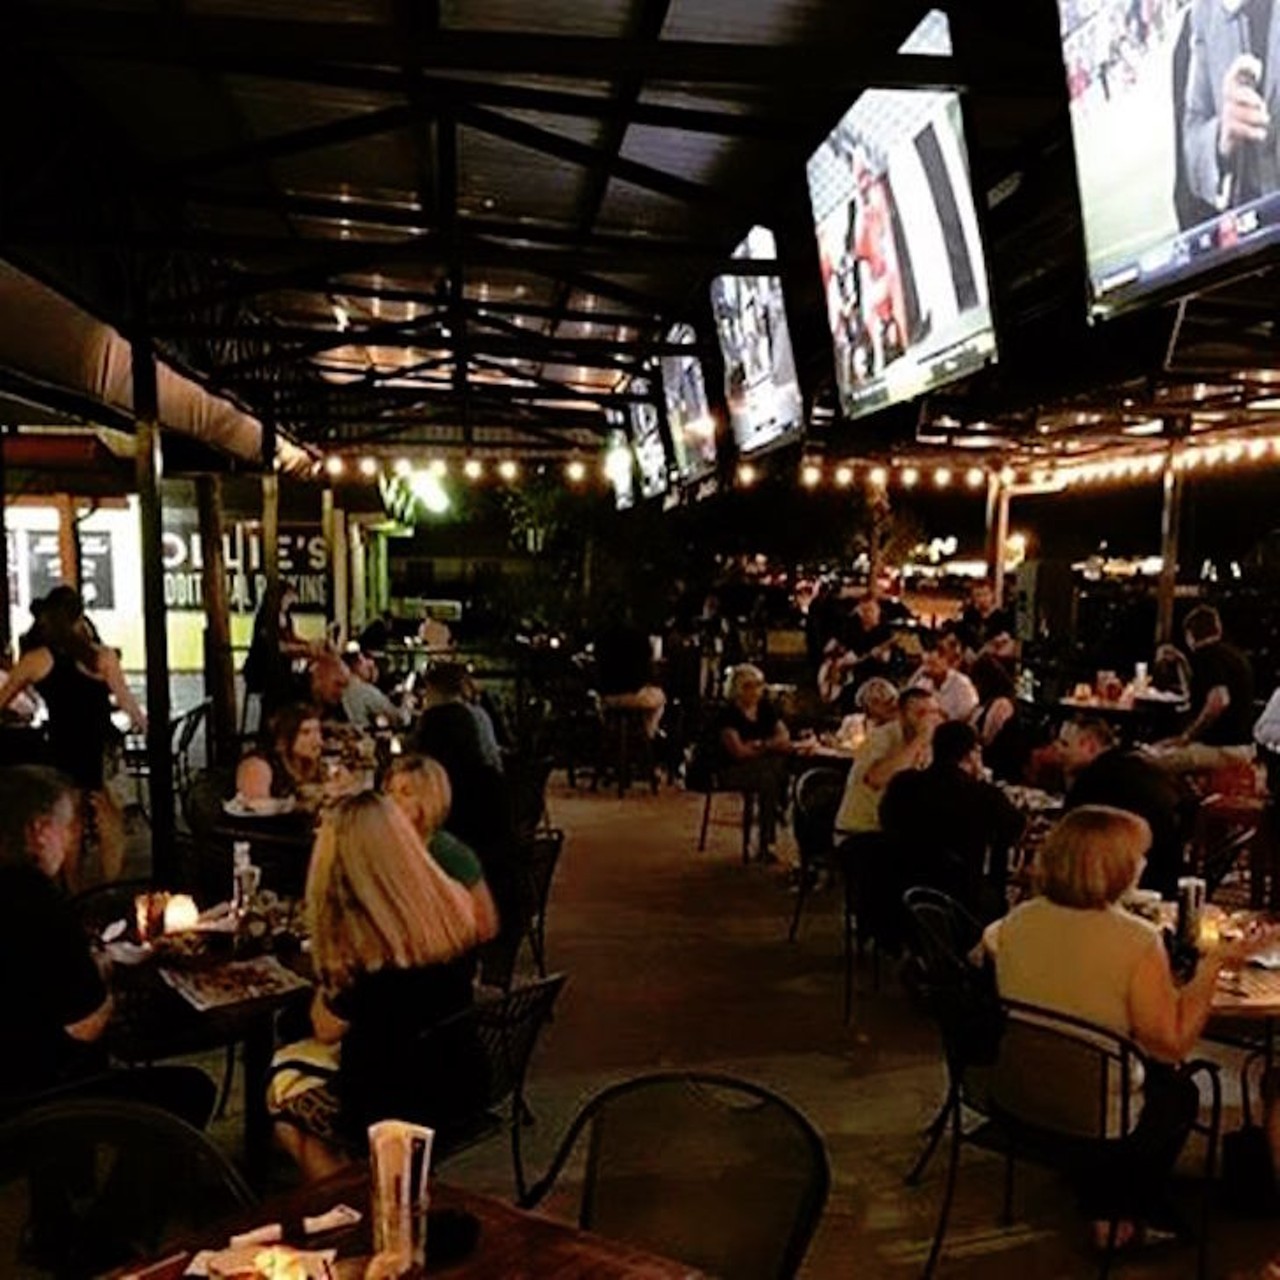 Ollie&#146;s Public House
3400 Edgewater Drive, 407-999-8934
27 TVs
If you&#146;re in the College Park area, stop by Ollie&#146;s to enjoy a full liquor bar and live music on the patio. It also has one the best patios in town. 
Photo via olliespublichouse/Instagram